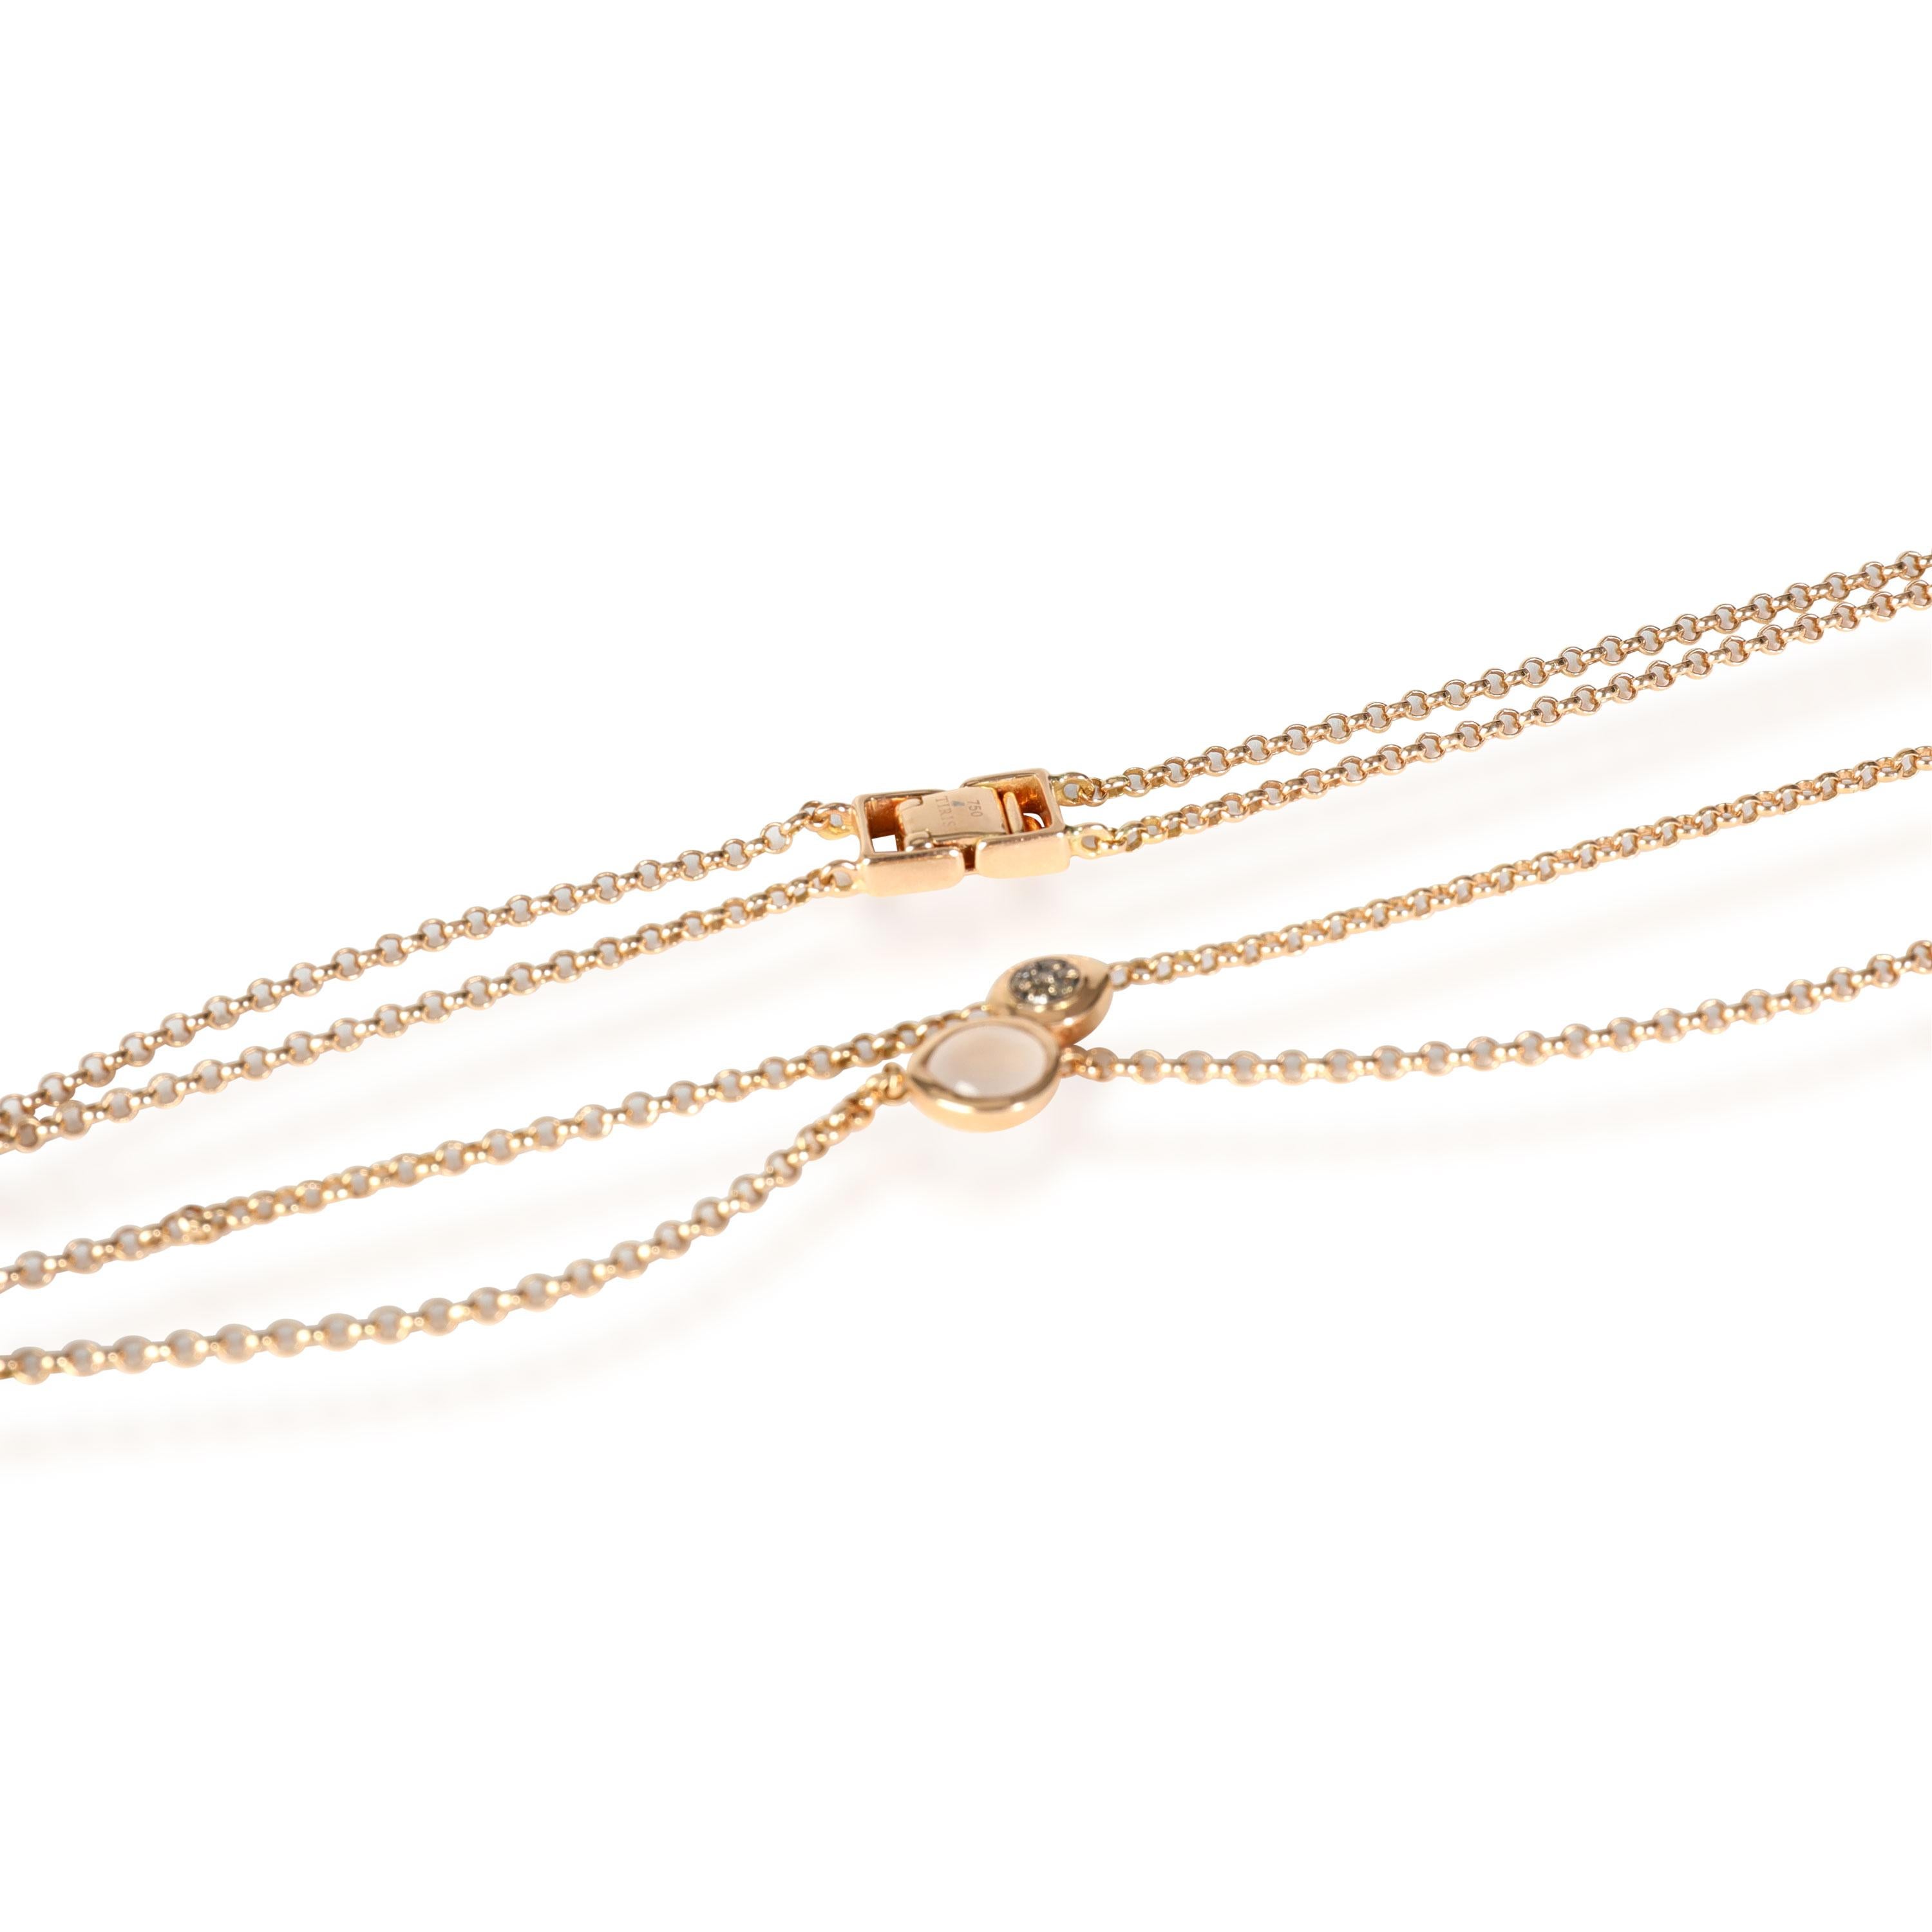 Tirisi Double Strand Quartz Diamond Necklace in 18K Rose Gold, 0.18 CTW In Excellent Condition For Sale In New York, NY